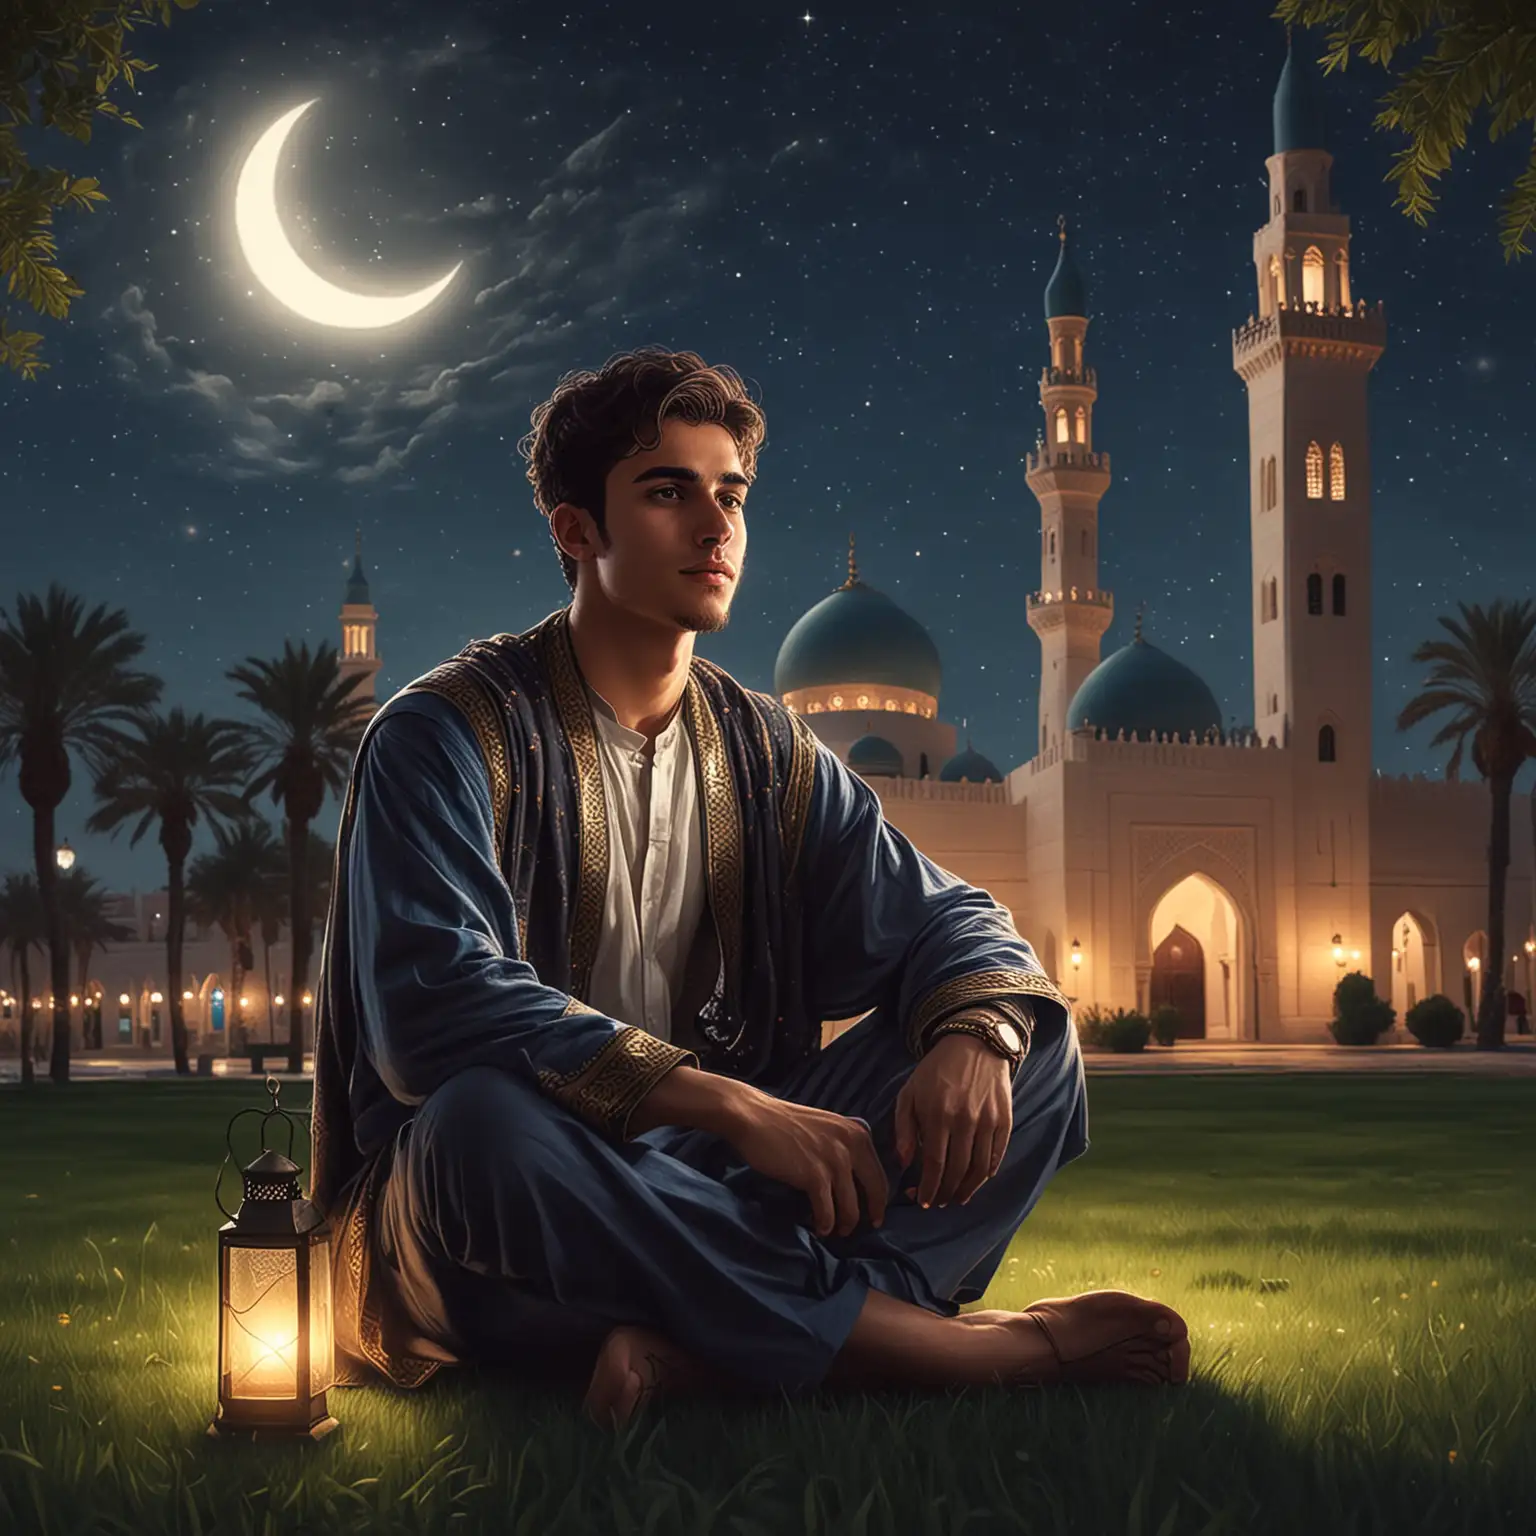 Young-Arab-Man-Sitting-in-Front-of-Mosque-at-Night-with-Crescent-and-Lamp